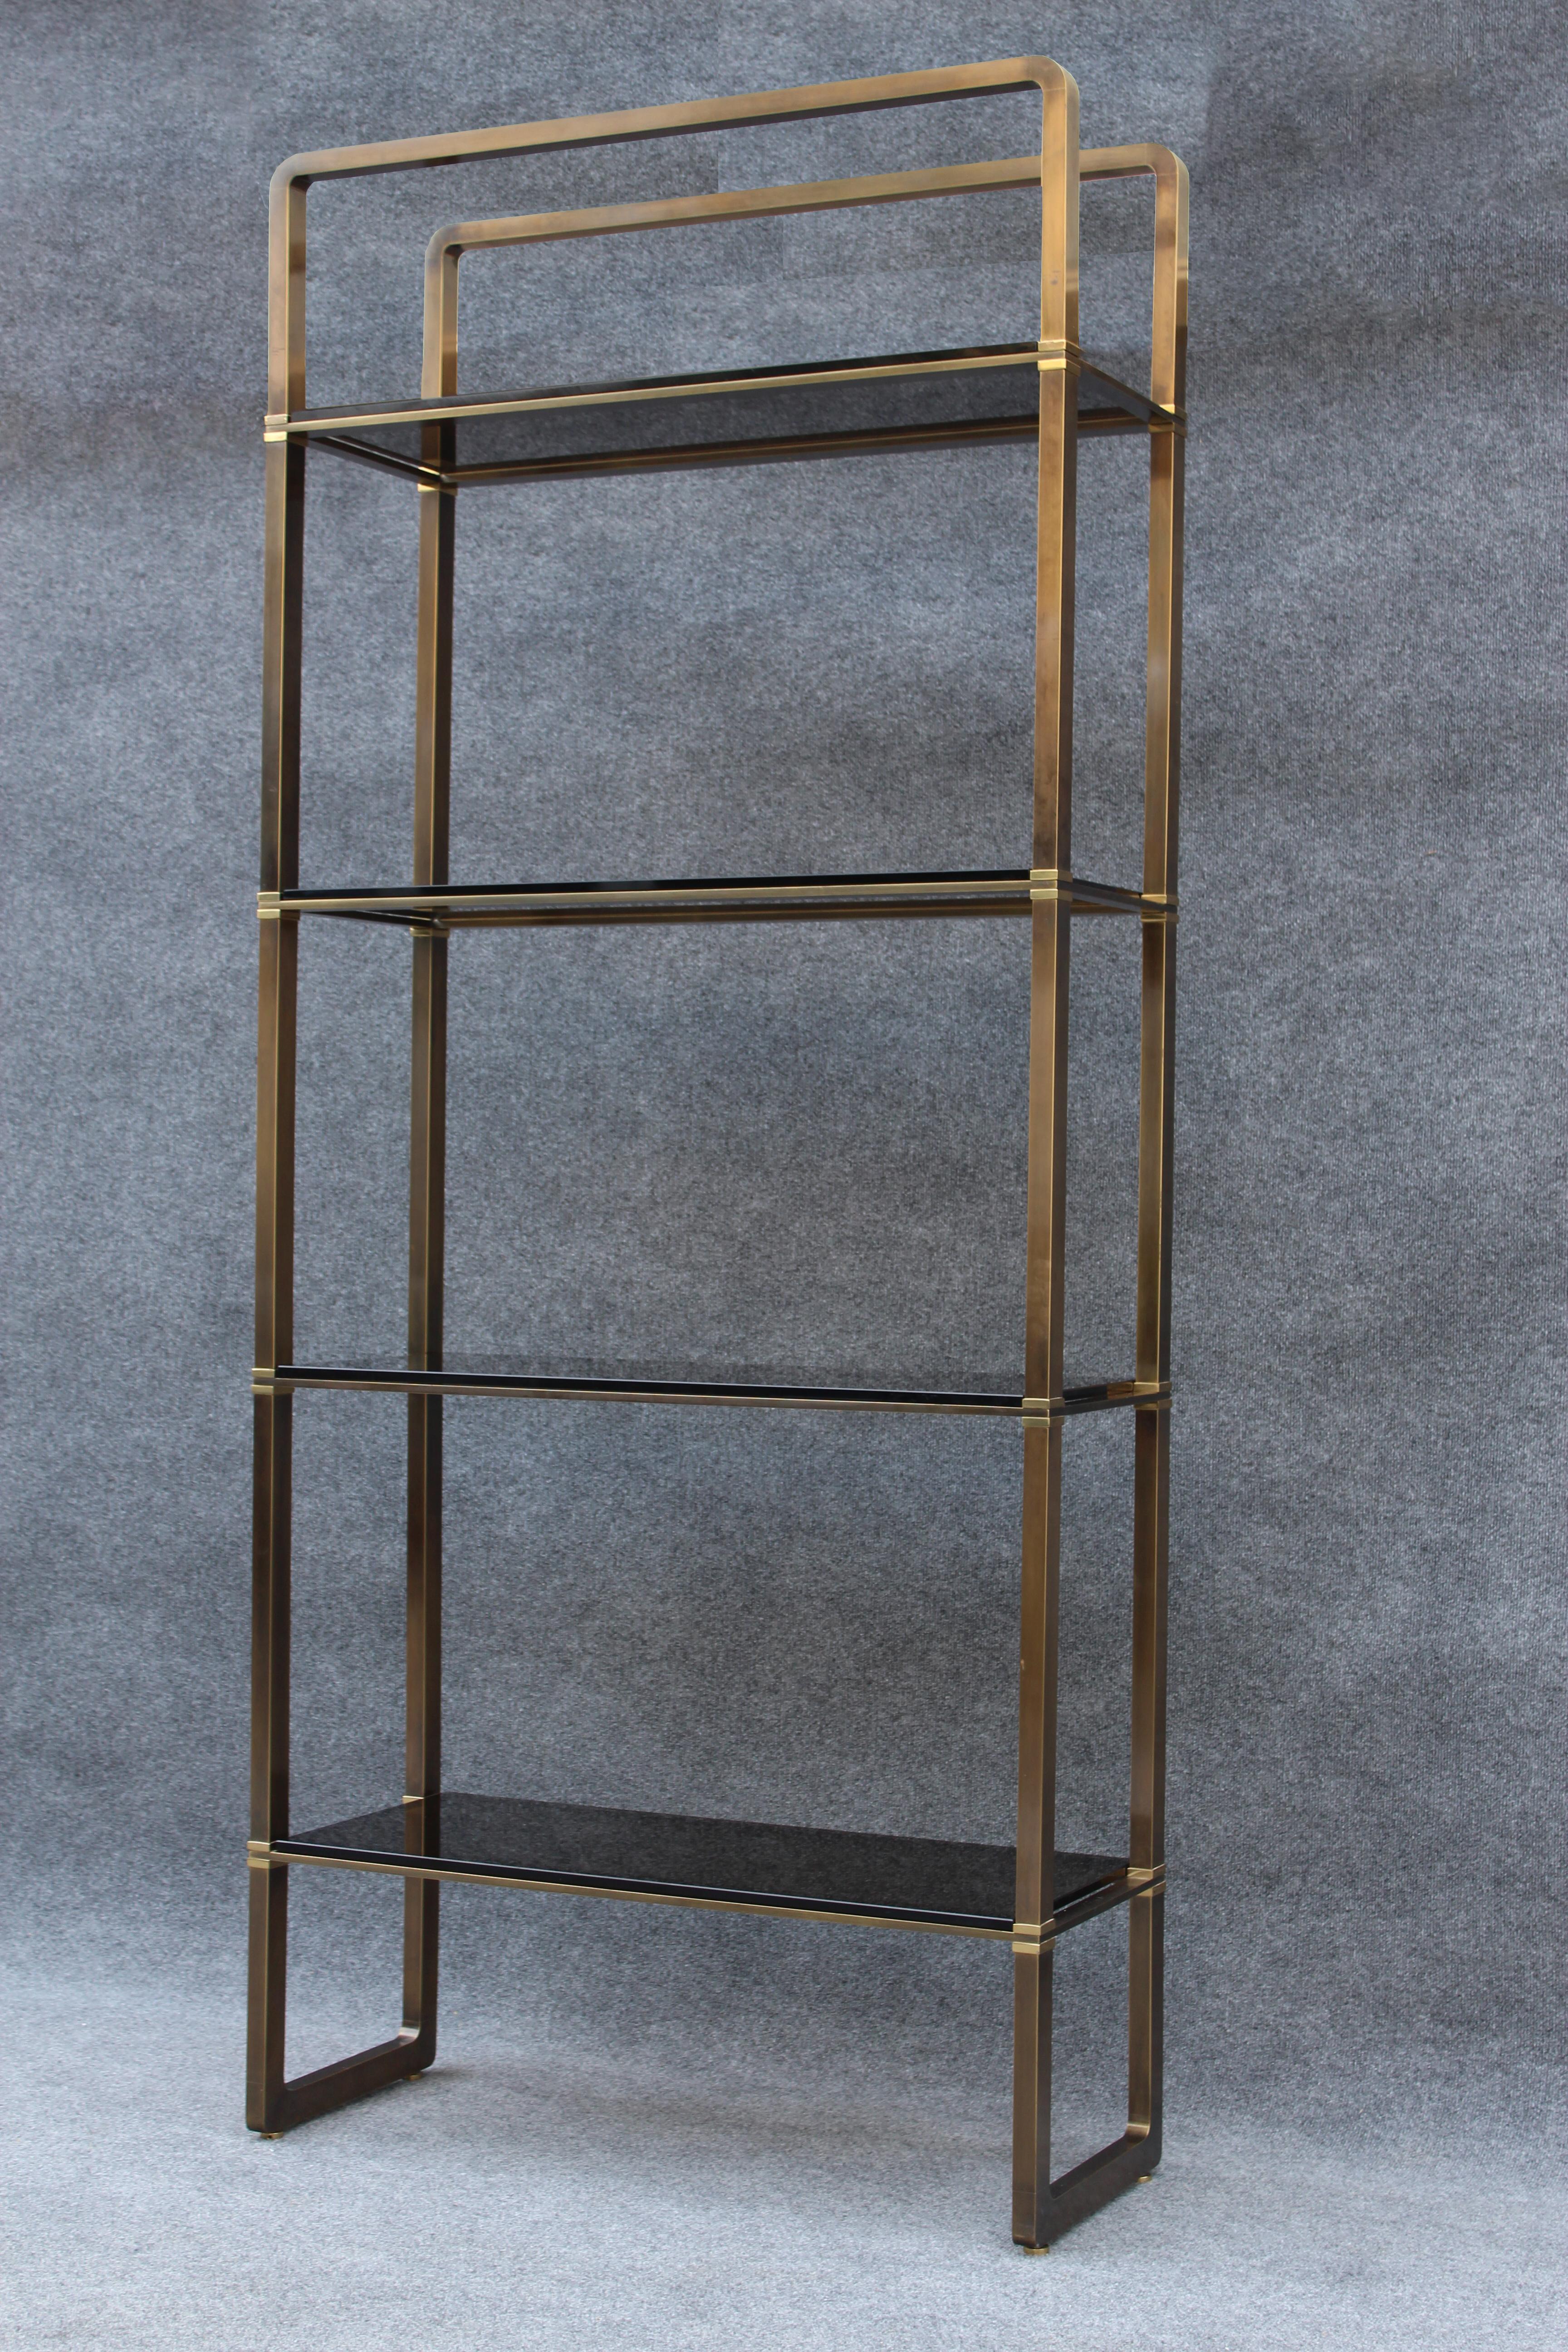 By American designer Paul M. Jones, this etagere features an excellent design and superb construction. Made of a frame of solid brass, each corner is meticulously rounded and the entire frame brushed to perfection. Each of the 4 panes of thick